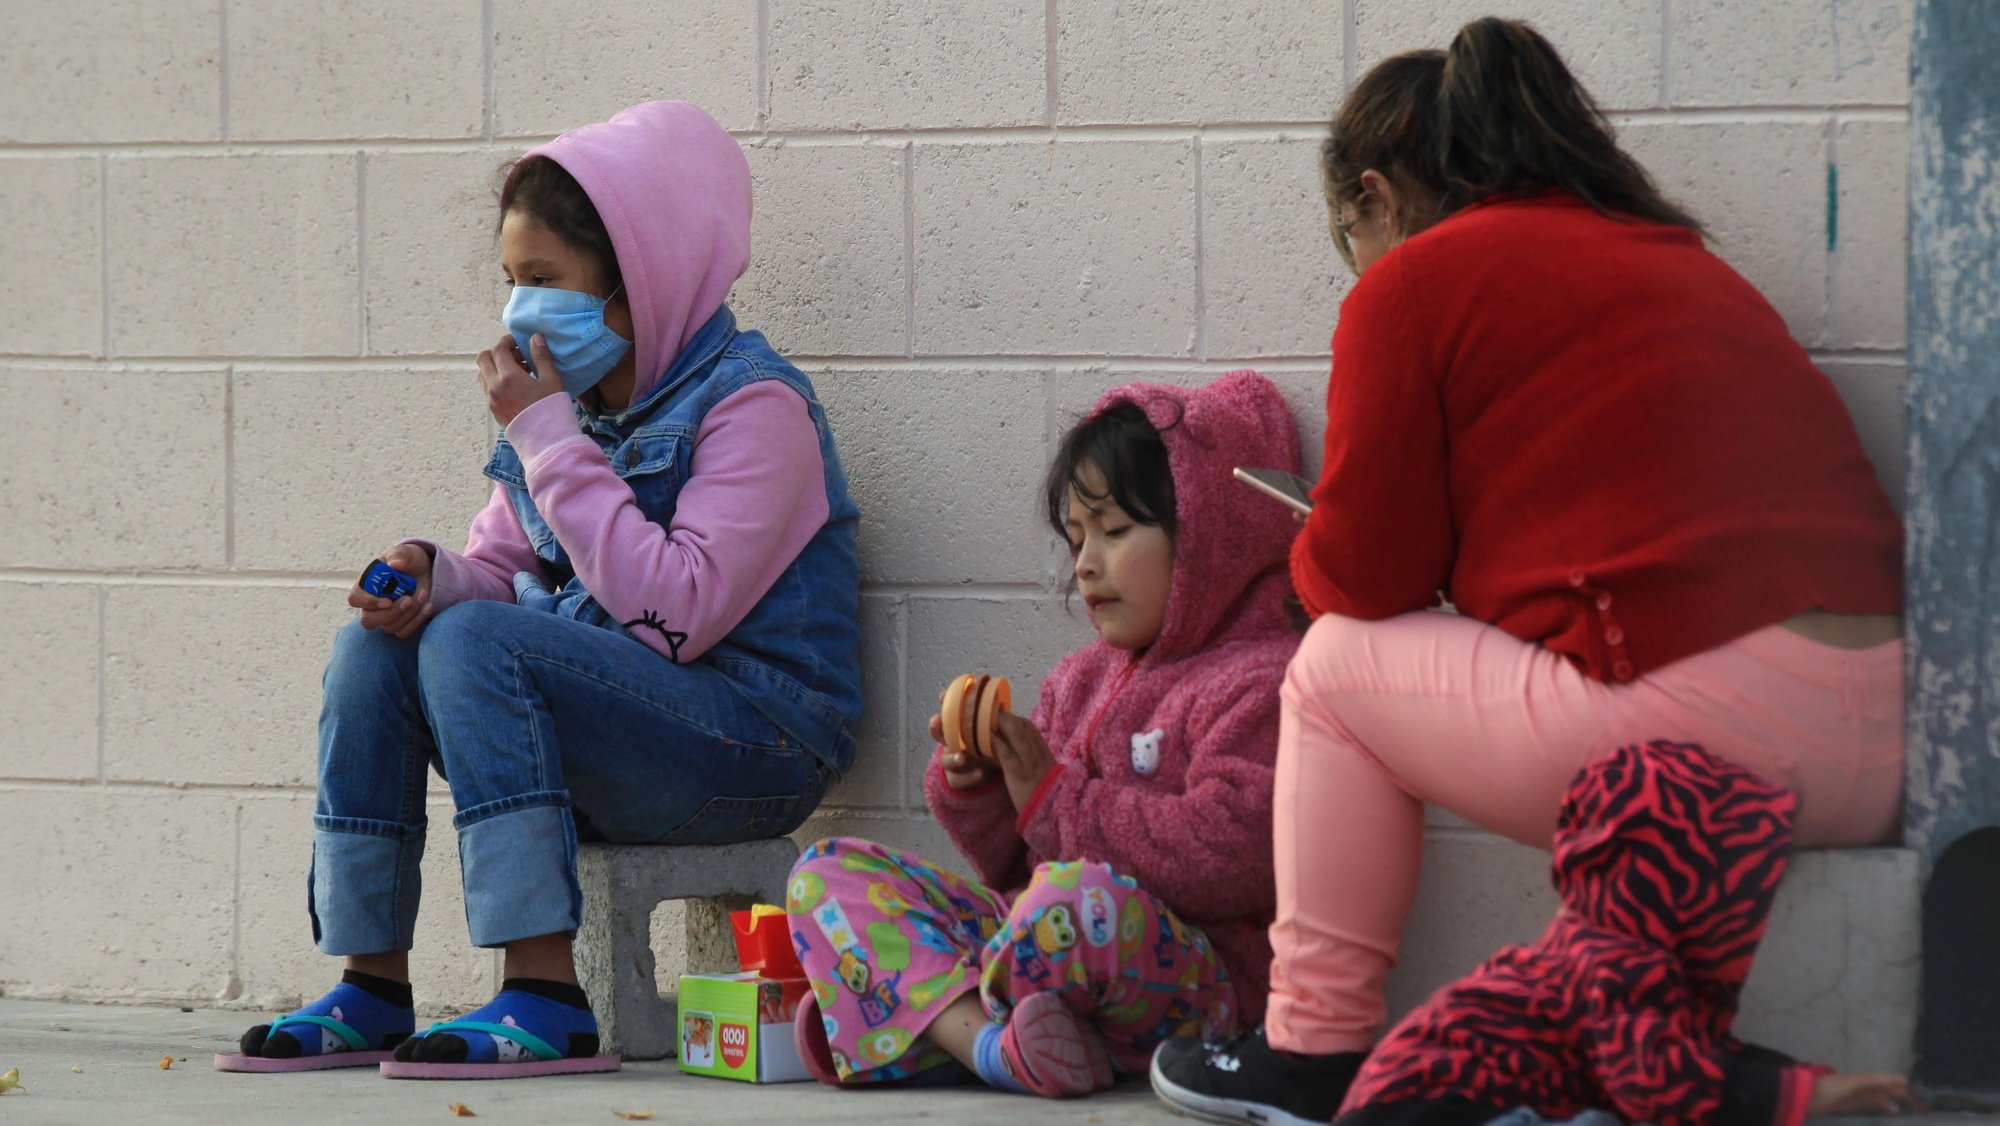 epa08092339 Several migrants from Central America rest at Leona Vicario federal shelter in the bordering city of Ciudad Juarez, in the state of Chihuahua, Mexico, 27 December 2019 (issued 28 December 2019). Health authorities of the Mexican state of Chihuahua reported a total of 72 cases of chickenpox in a migrant integration center in Ciudad Juarez, on the border with El Paso, USA. The cases were registered by the epidemiology department of the State Department of Health at the &#039;Leona Vicario&#039; Migrant Center, authorities said in a press release released to the media.  EPA/LUIS TORRES